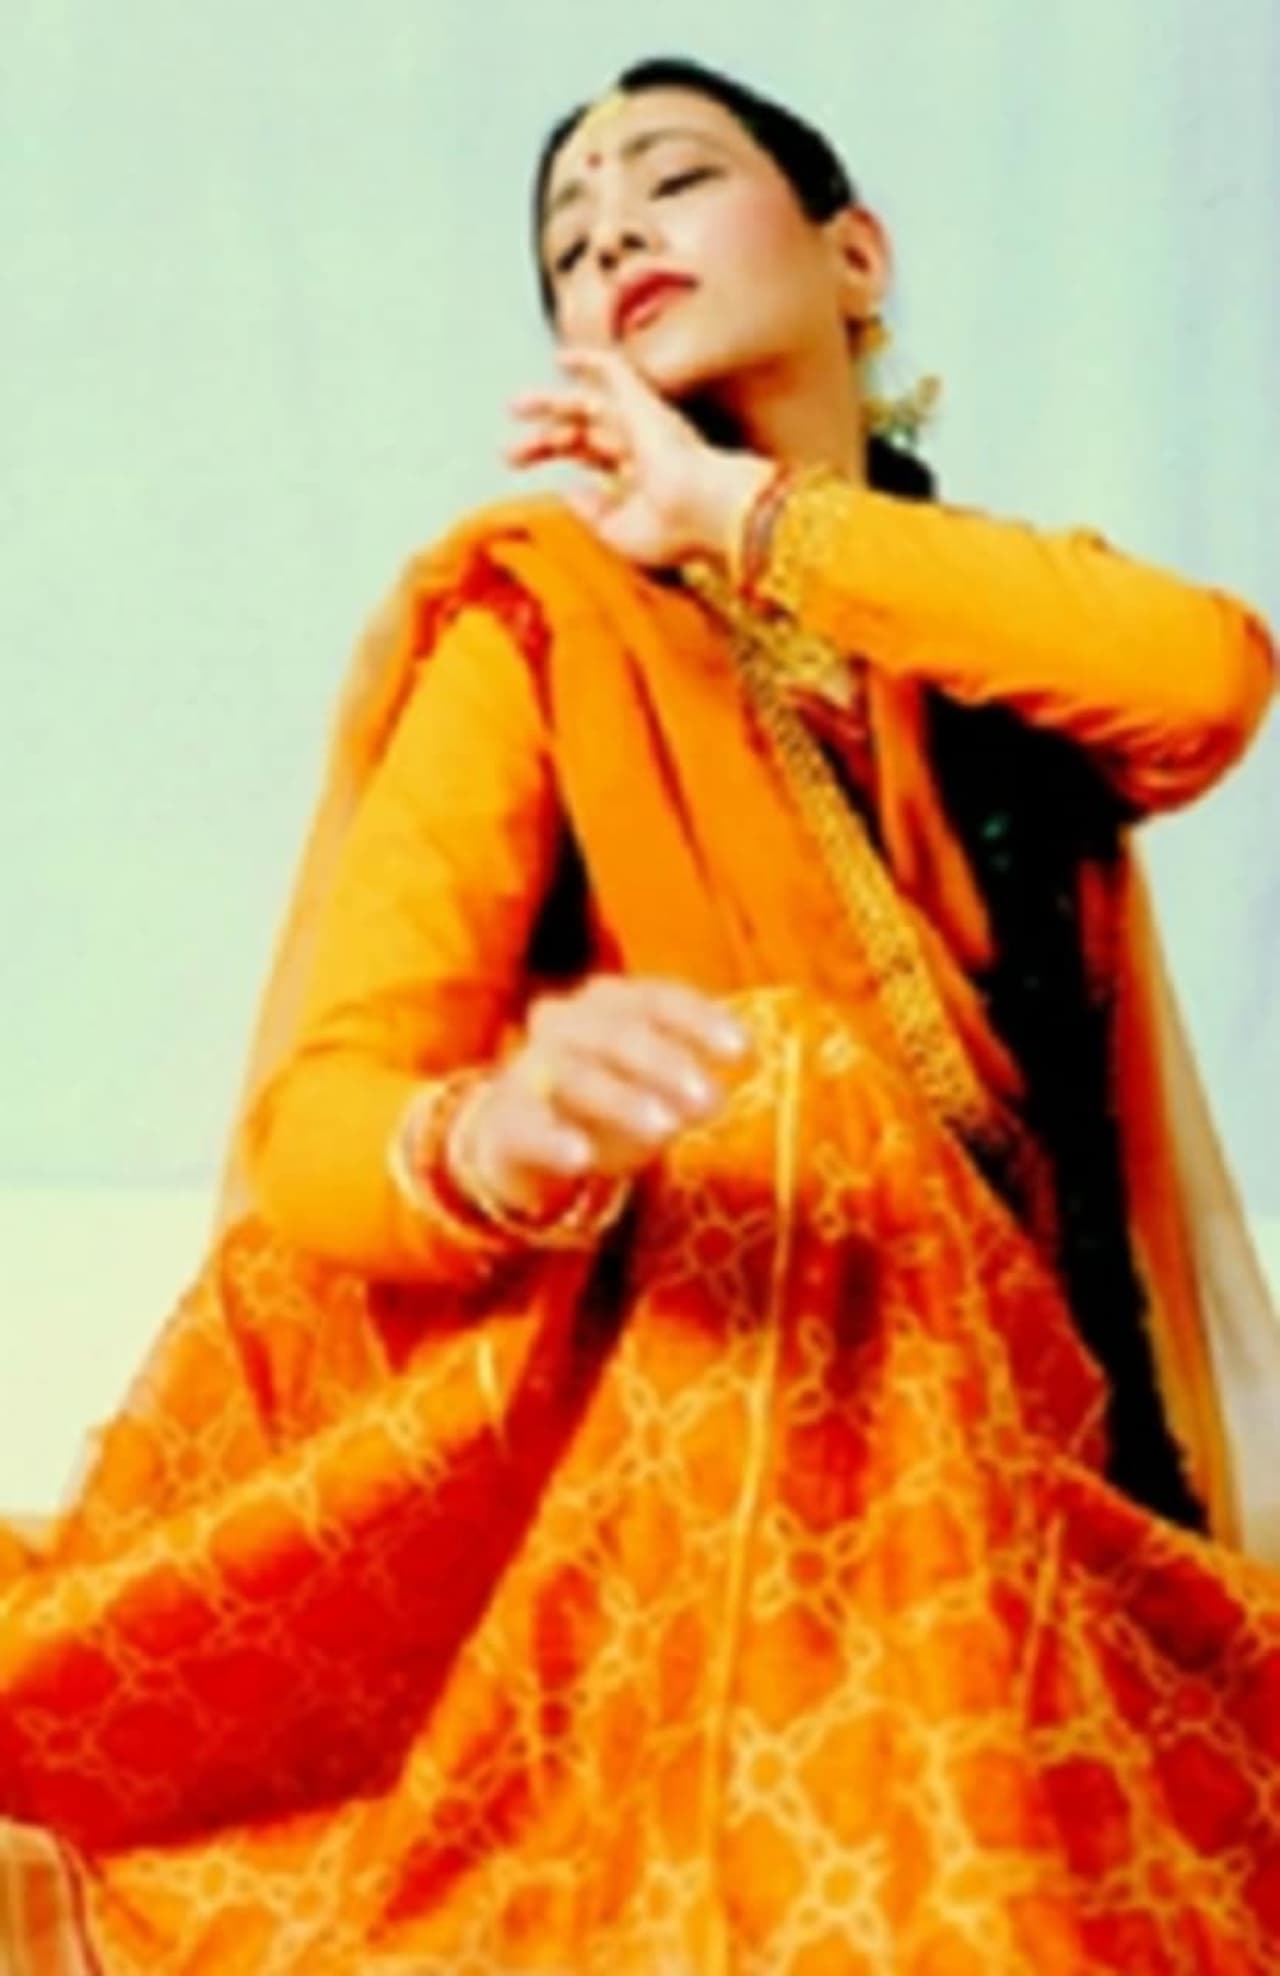 “Dances of India” will take place at the Trumbull Library Sunday. 